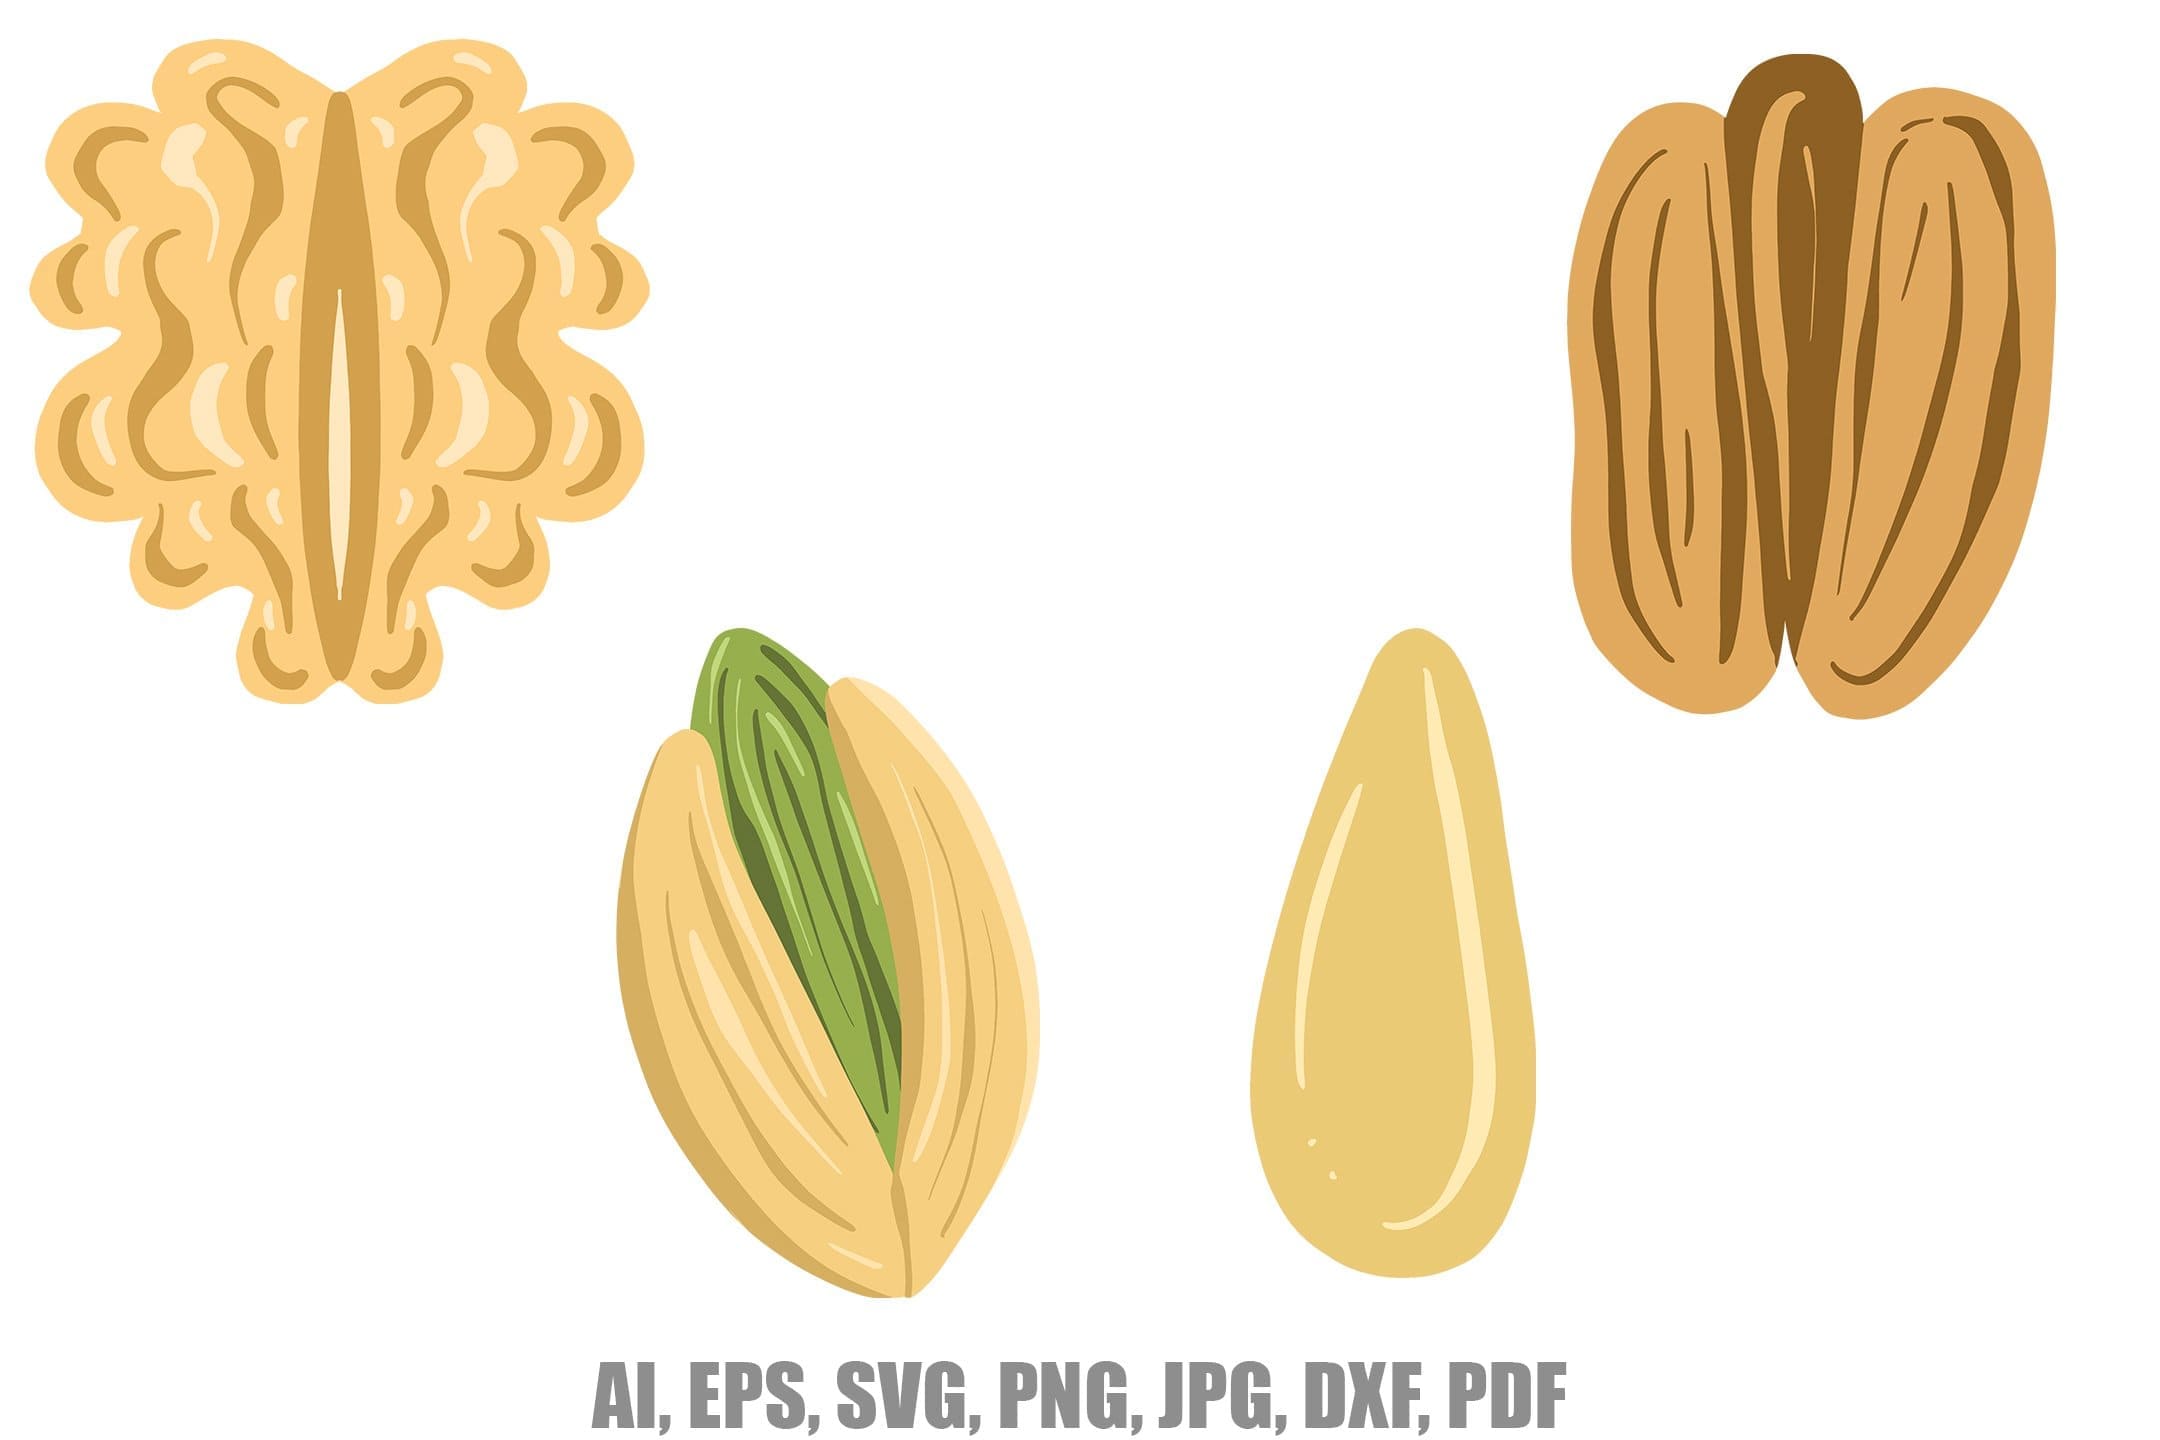 Collection of illustrations of nuts and seeds: peanut, walnut, Brazil nut, pistachio.